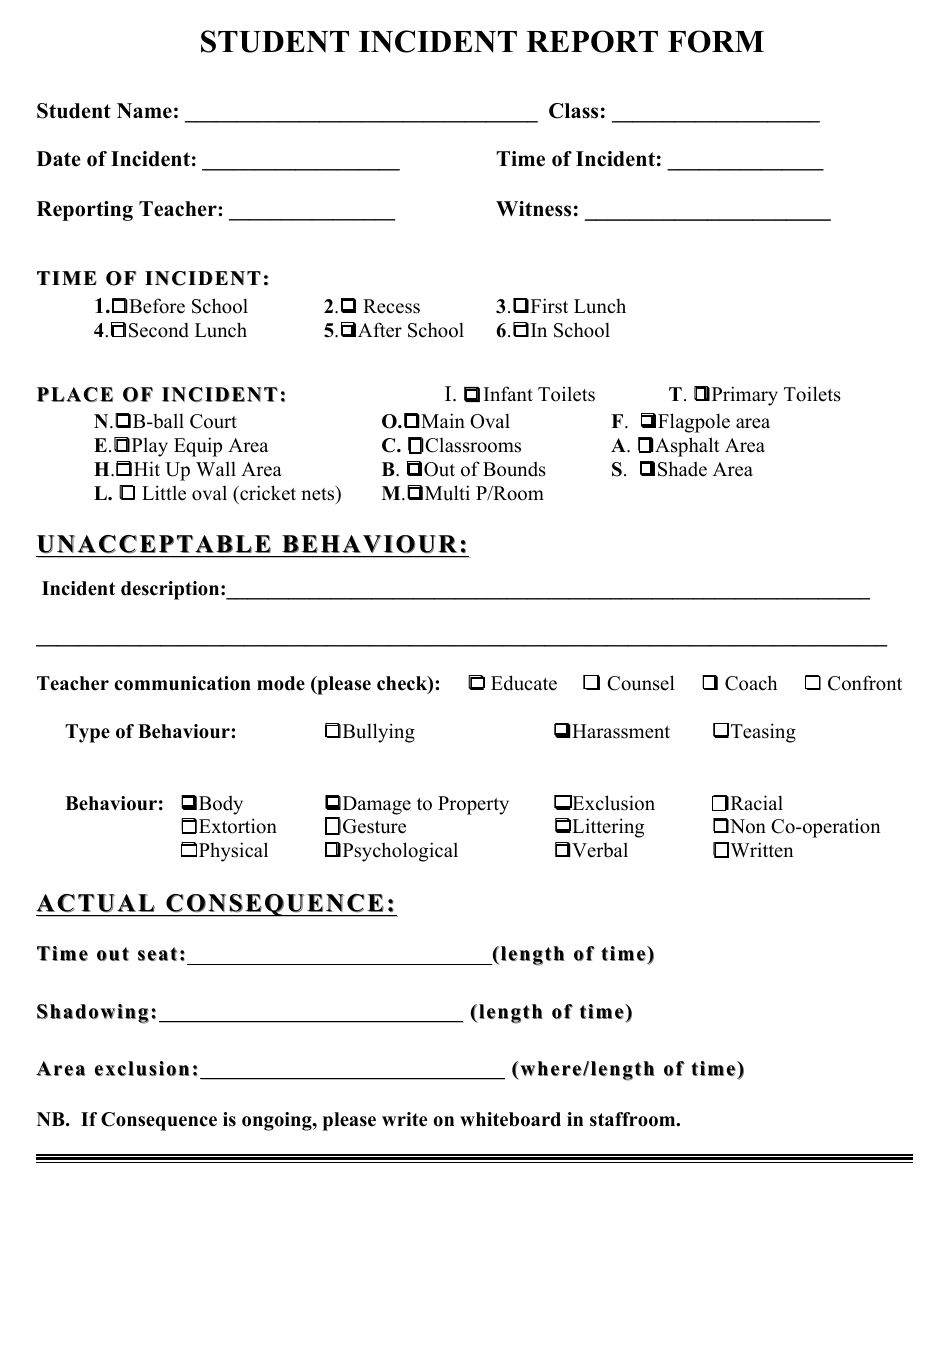 Student Incident Report Form, Page 1